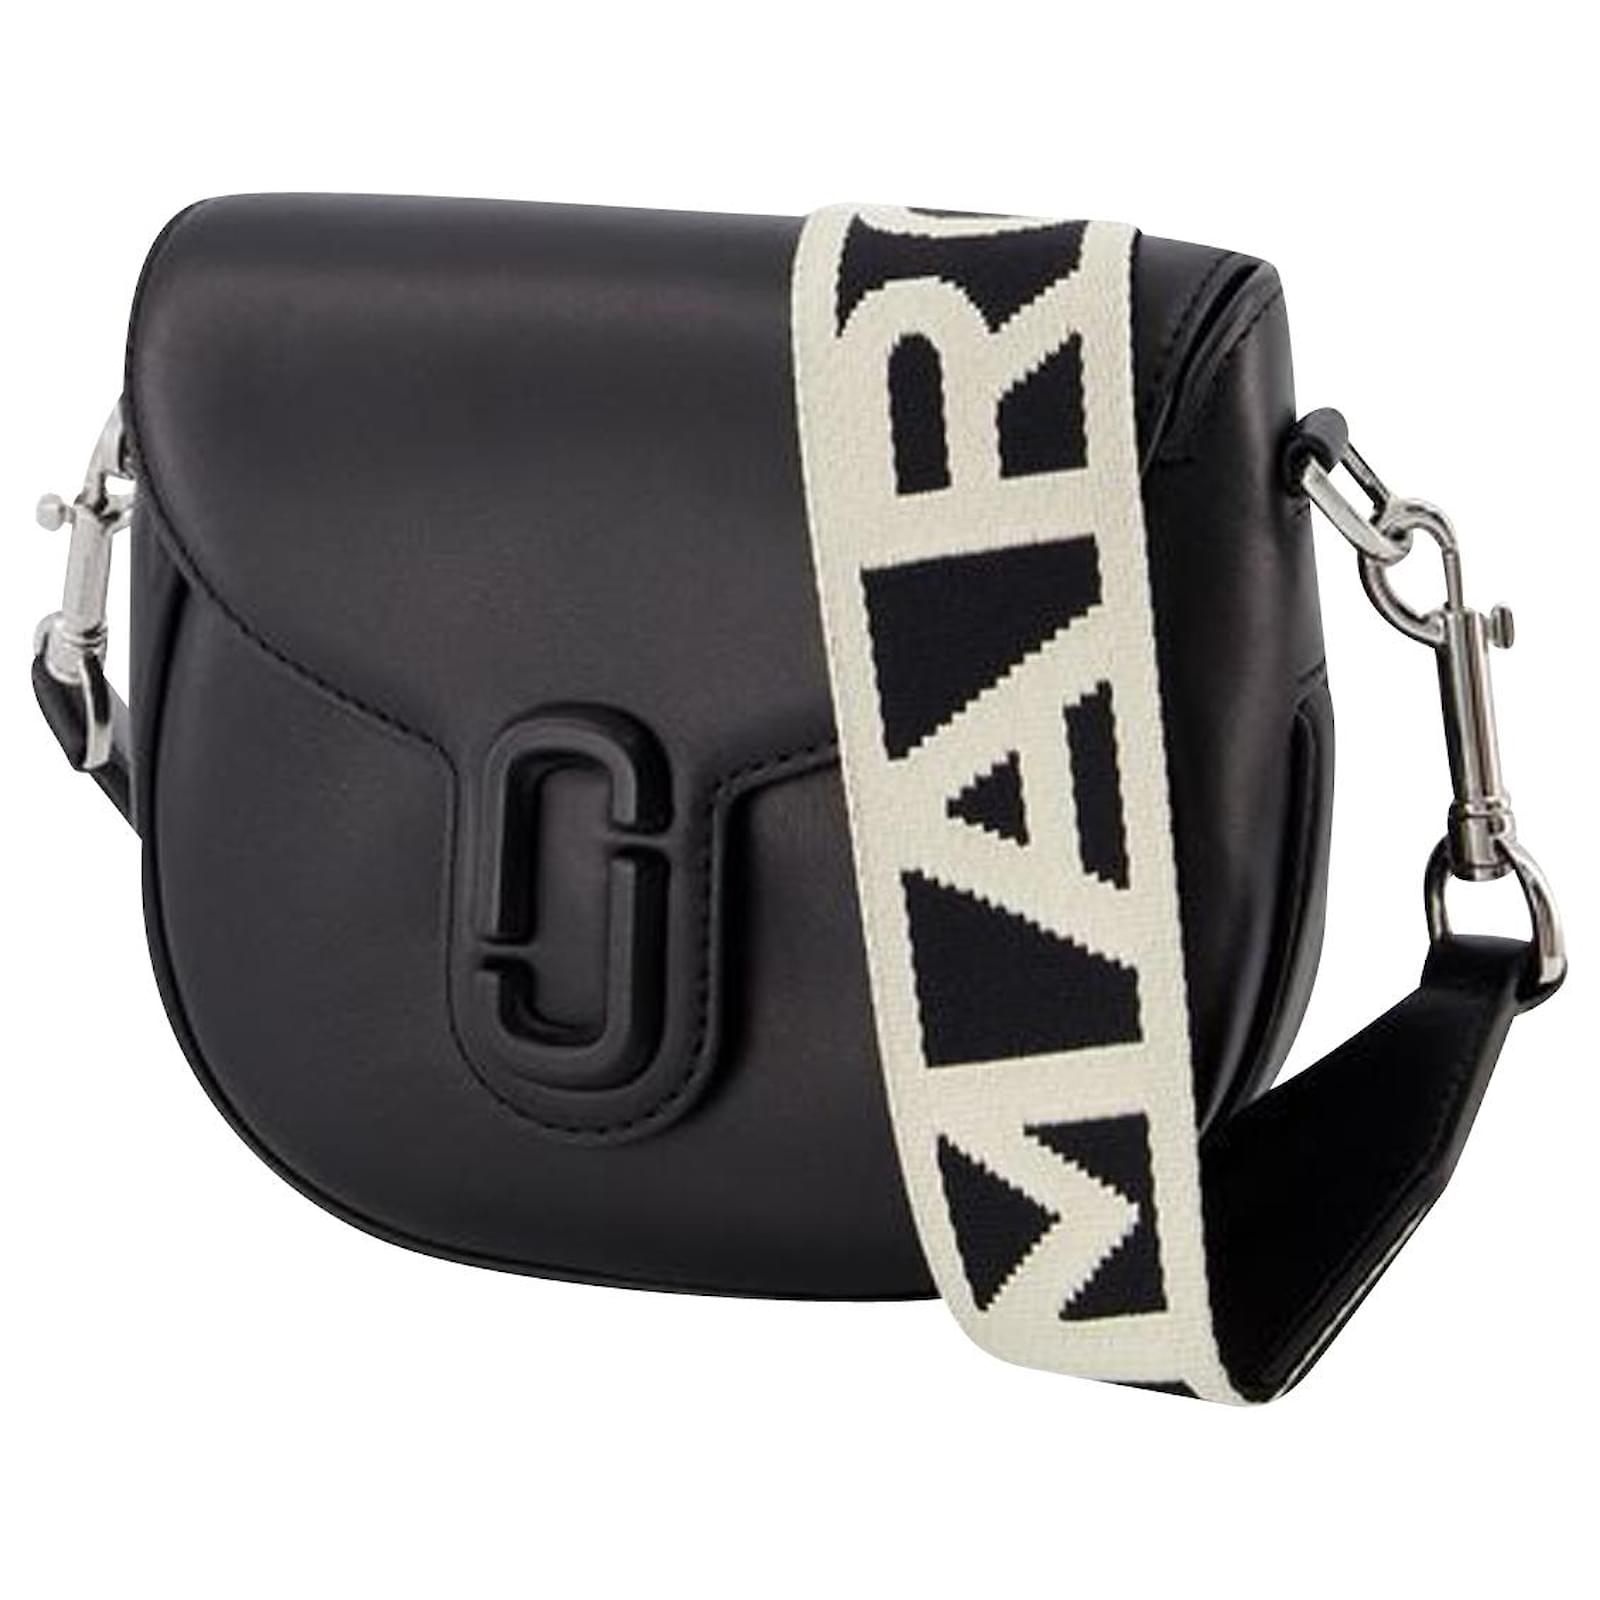 The Small Saddle Bag - Marc Jacobs - Leather - Black Pony-style